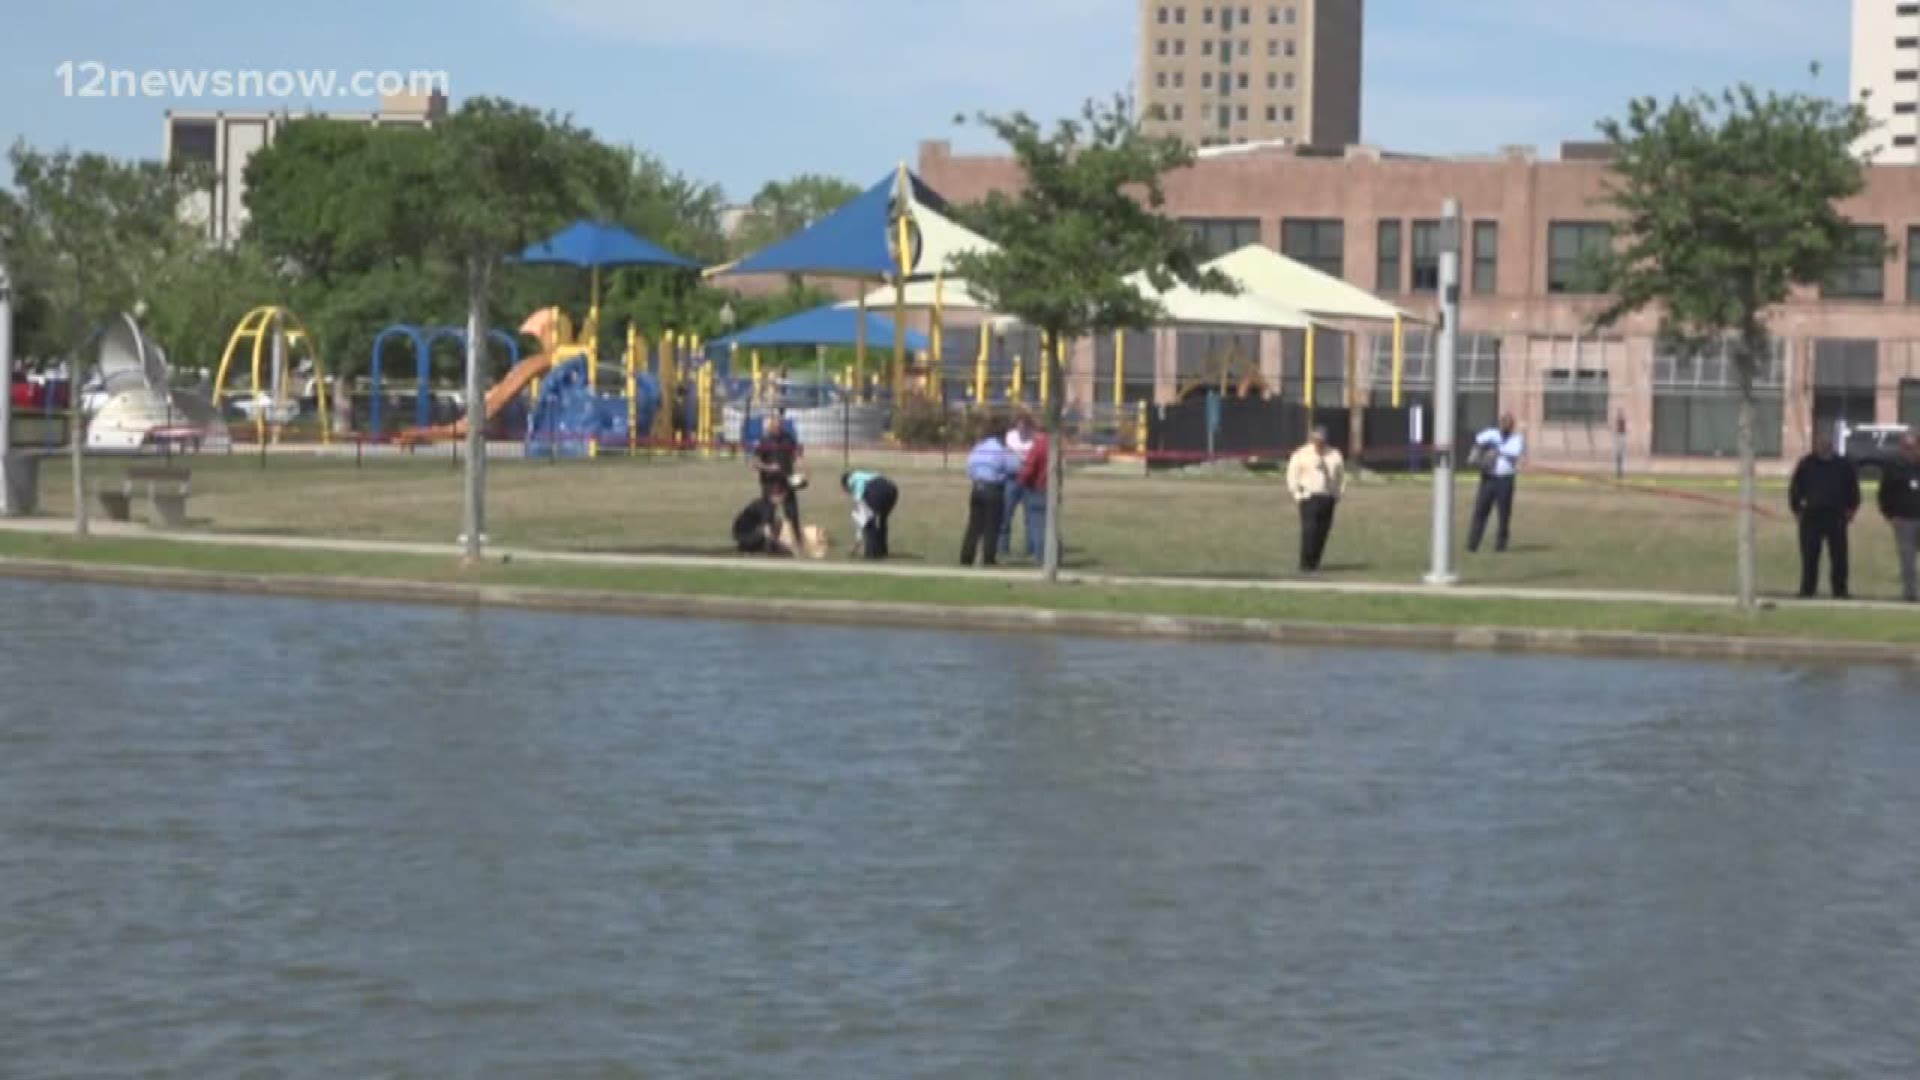 More than 20 children have drowned in 2020 in Texas